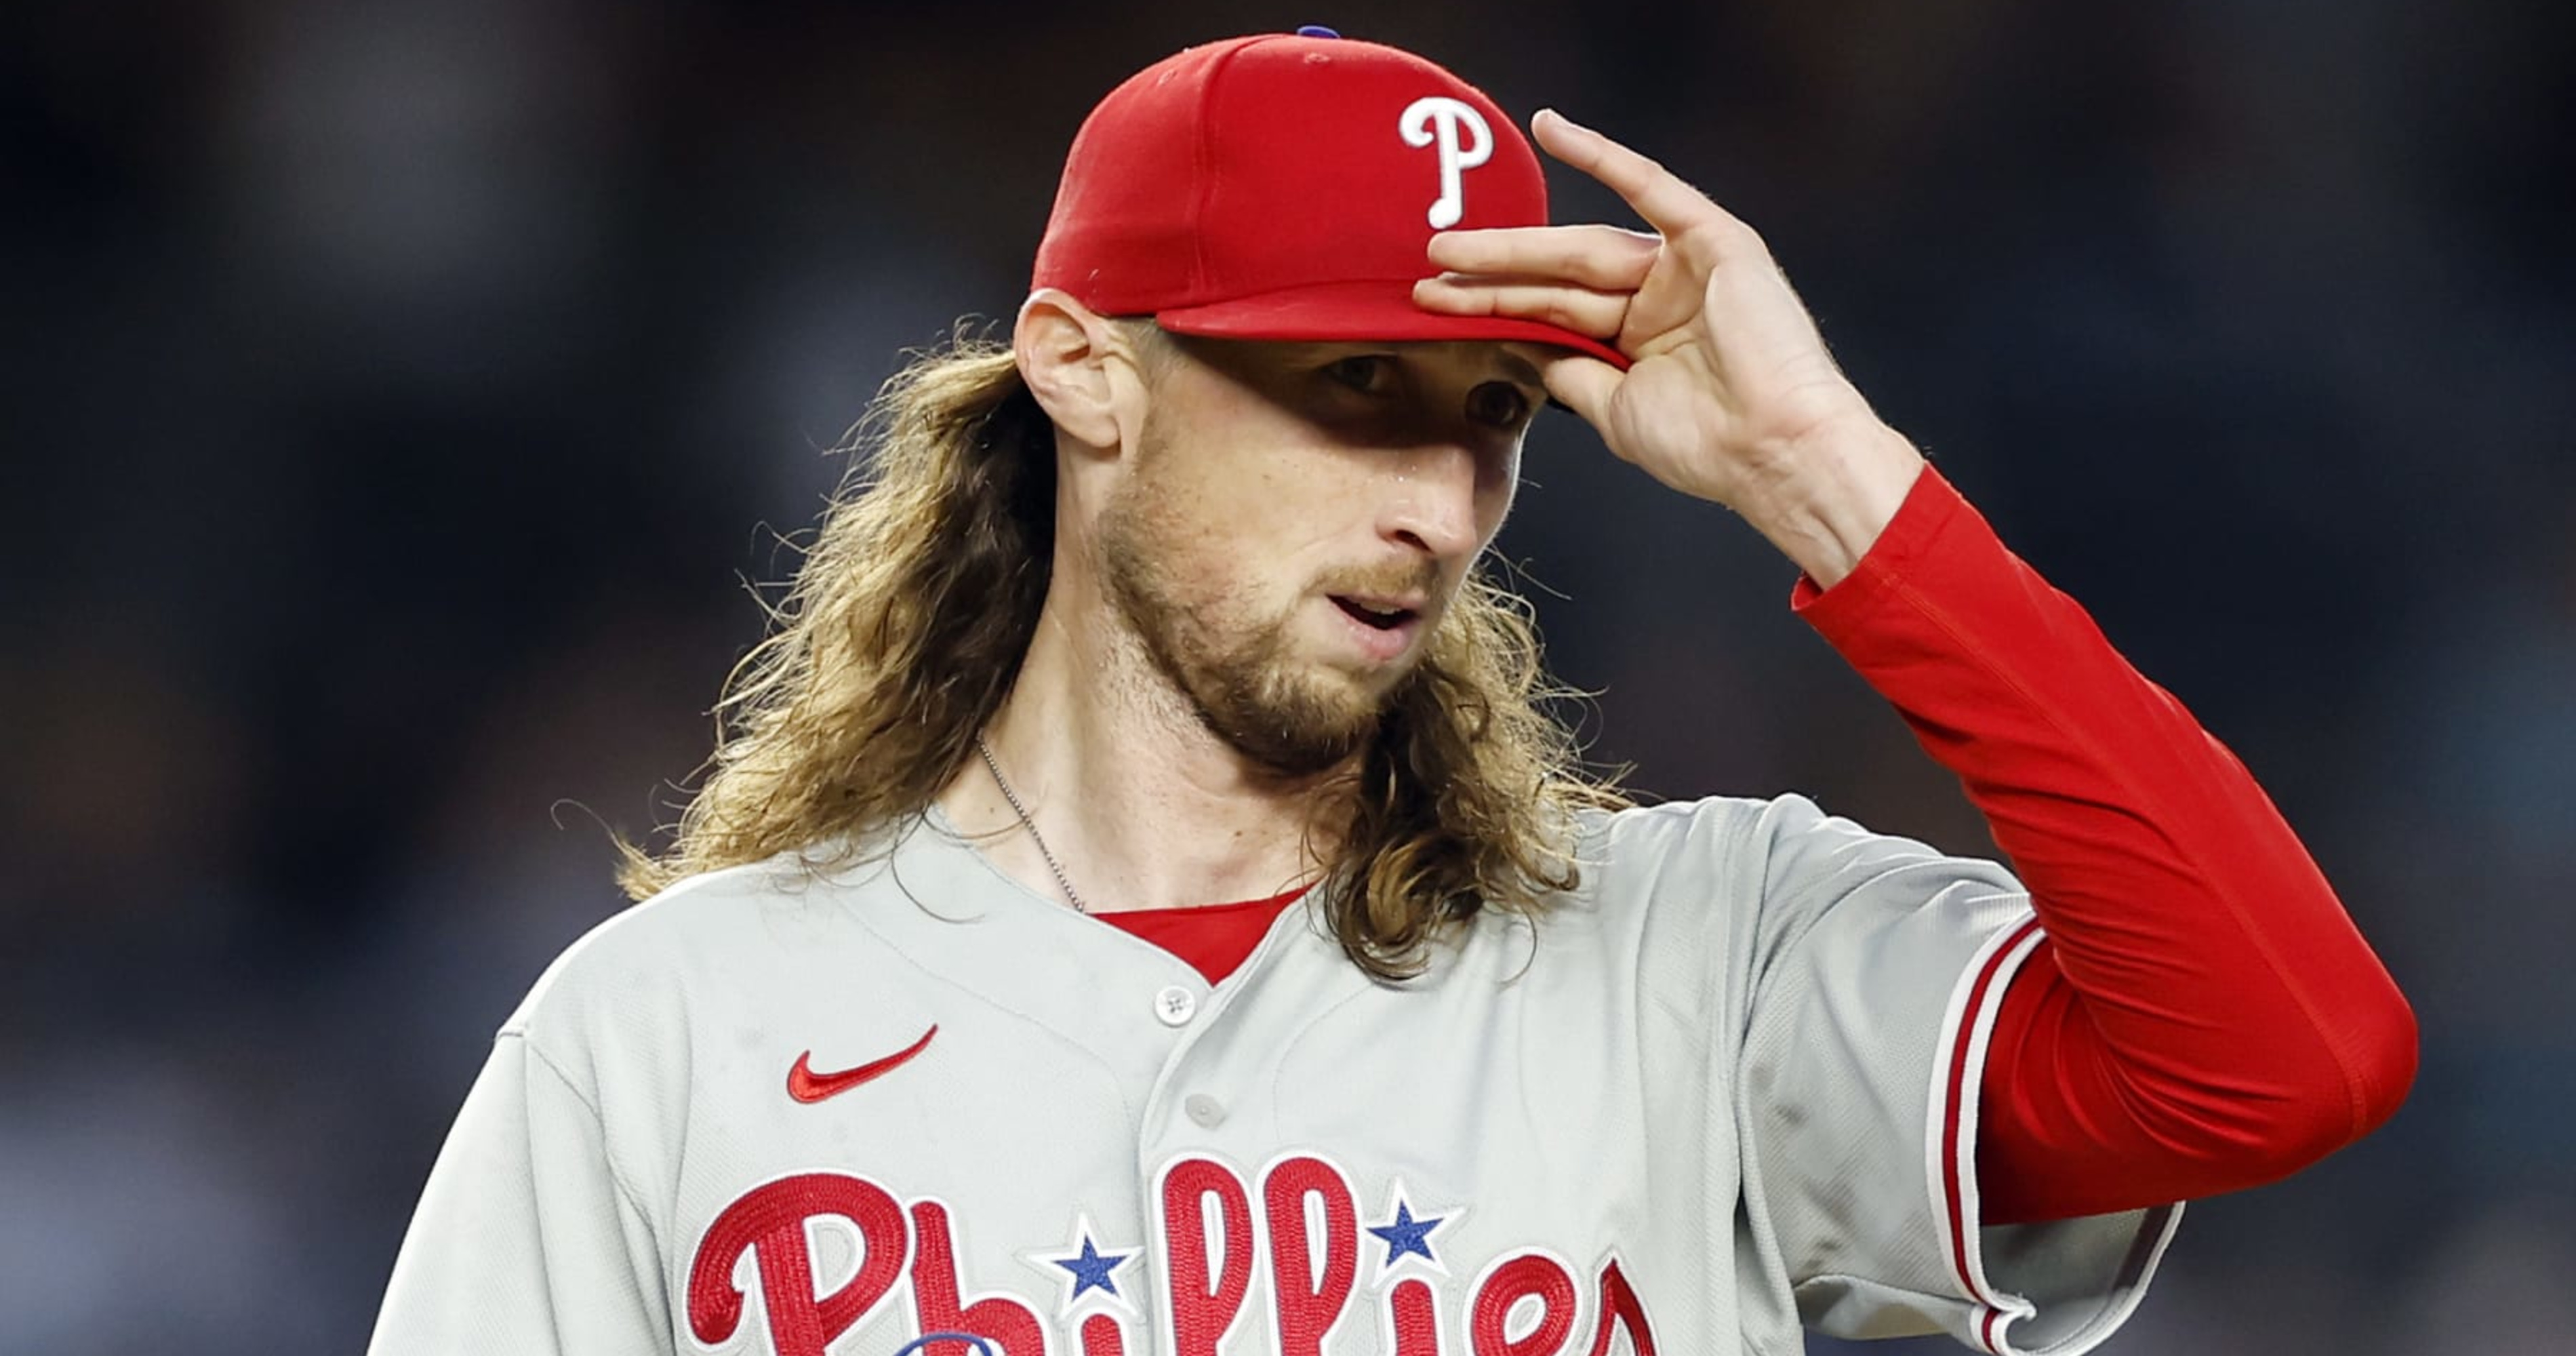 Phillies Pitcher Slams MLB Teams for Extending Beer Sales